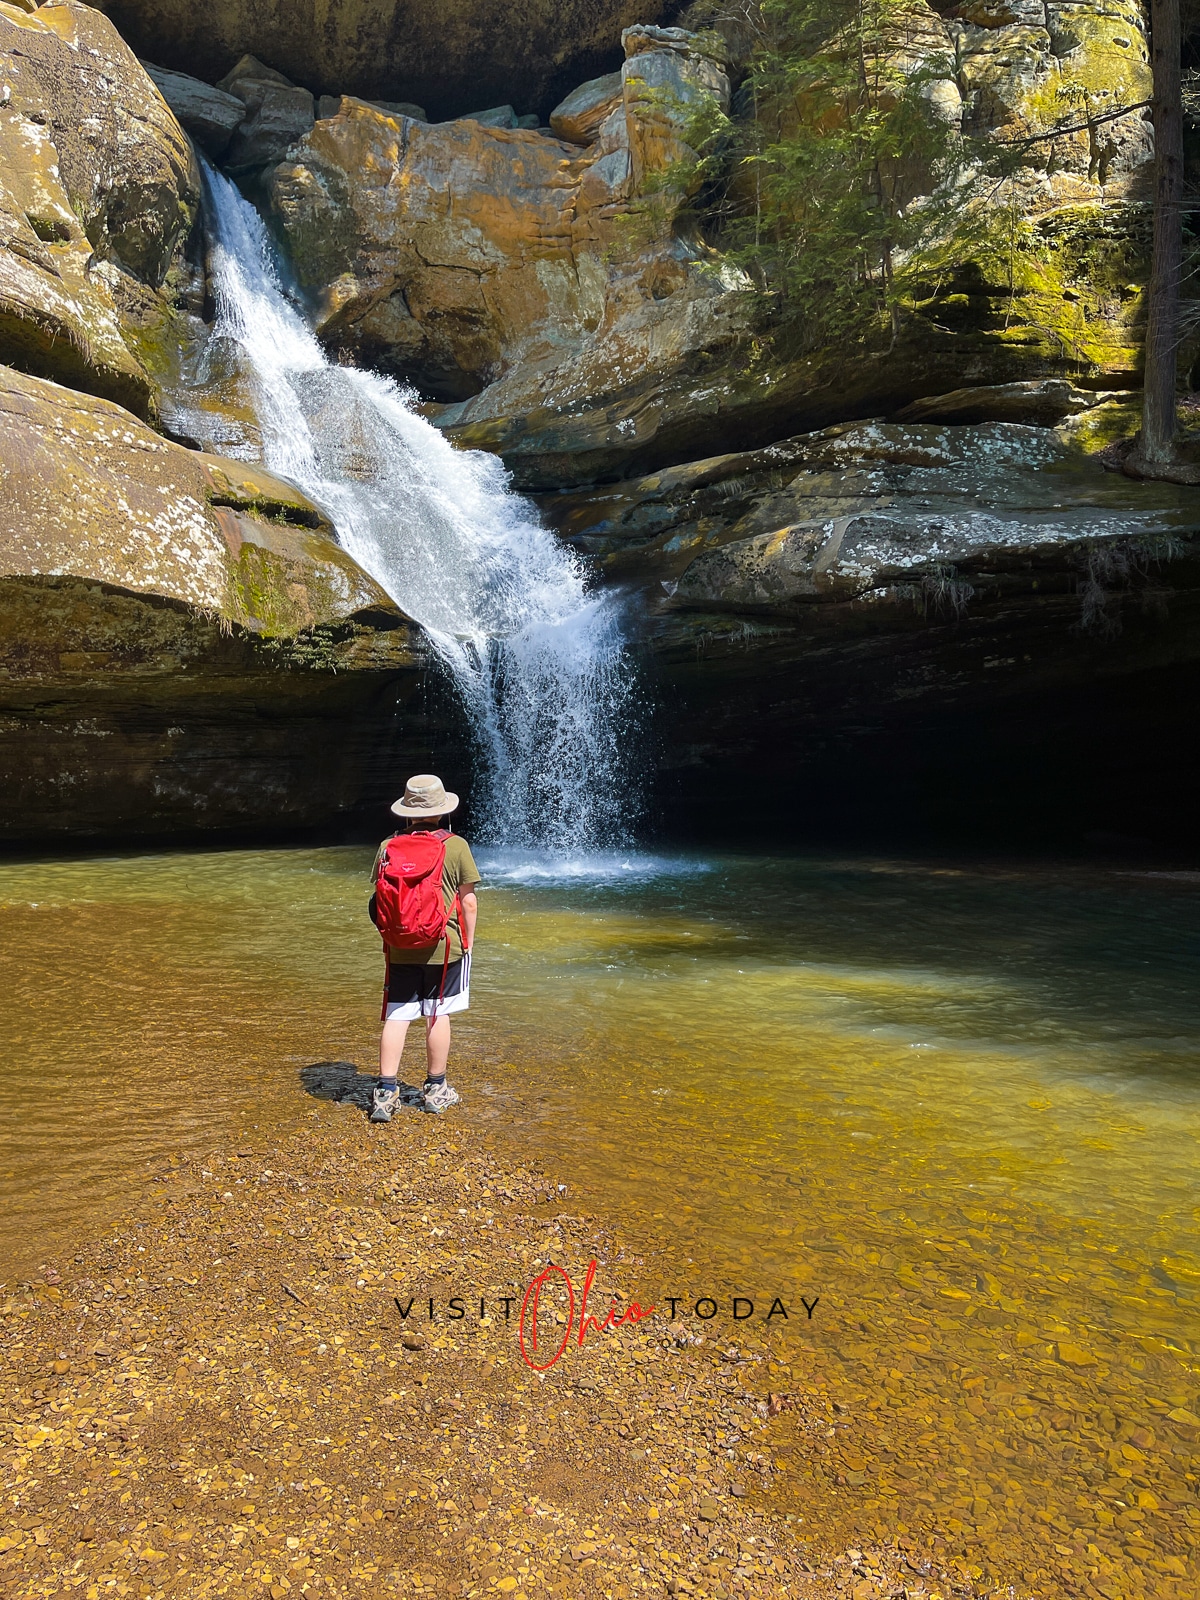 unobstructed view of cedar falls waterfall, water flowing down rocks into a clear pool, person with shorts, a red backpack and hat standing facing the waterfall Photo credit: Cindy Gordon of VisitOhioToday.com